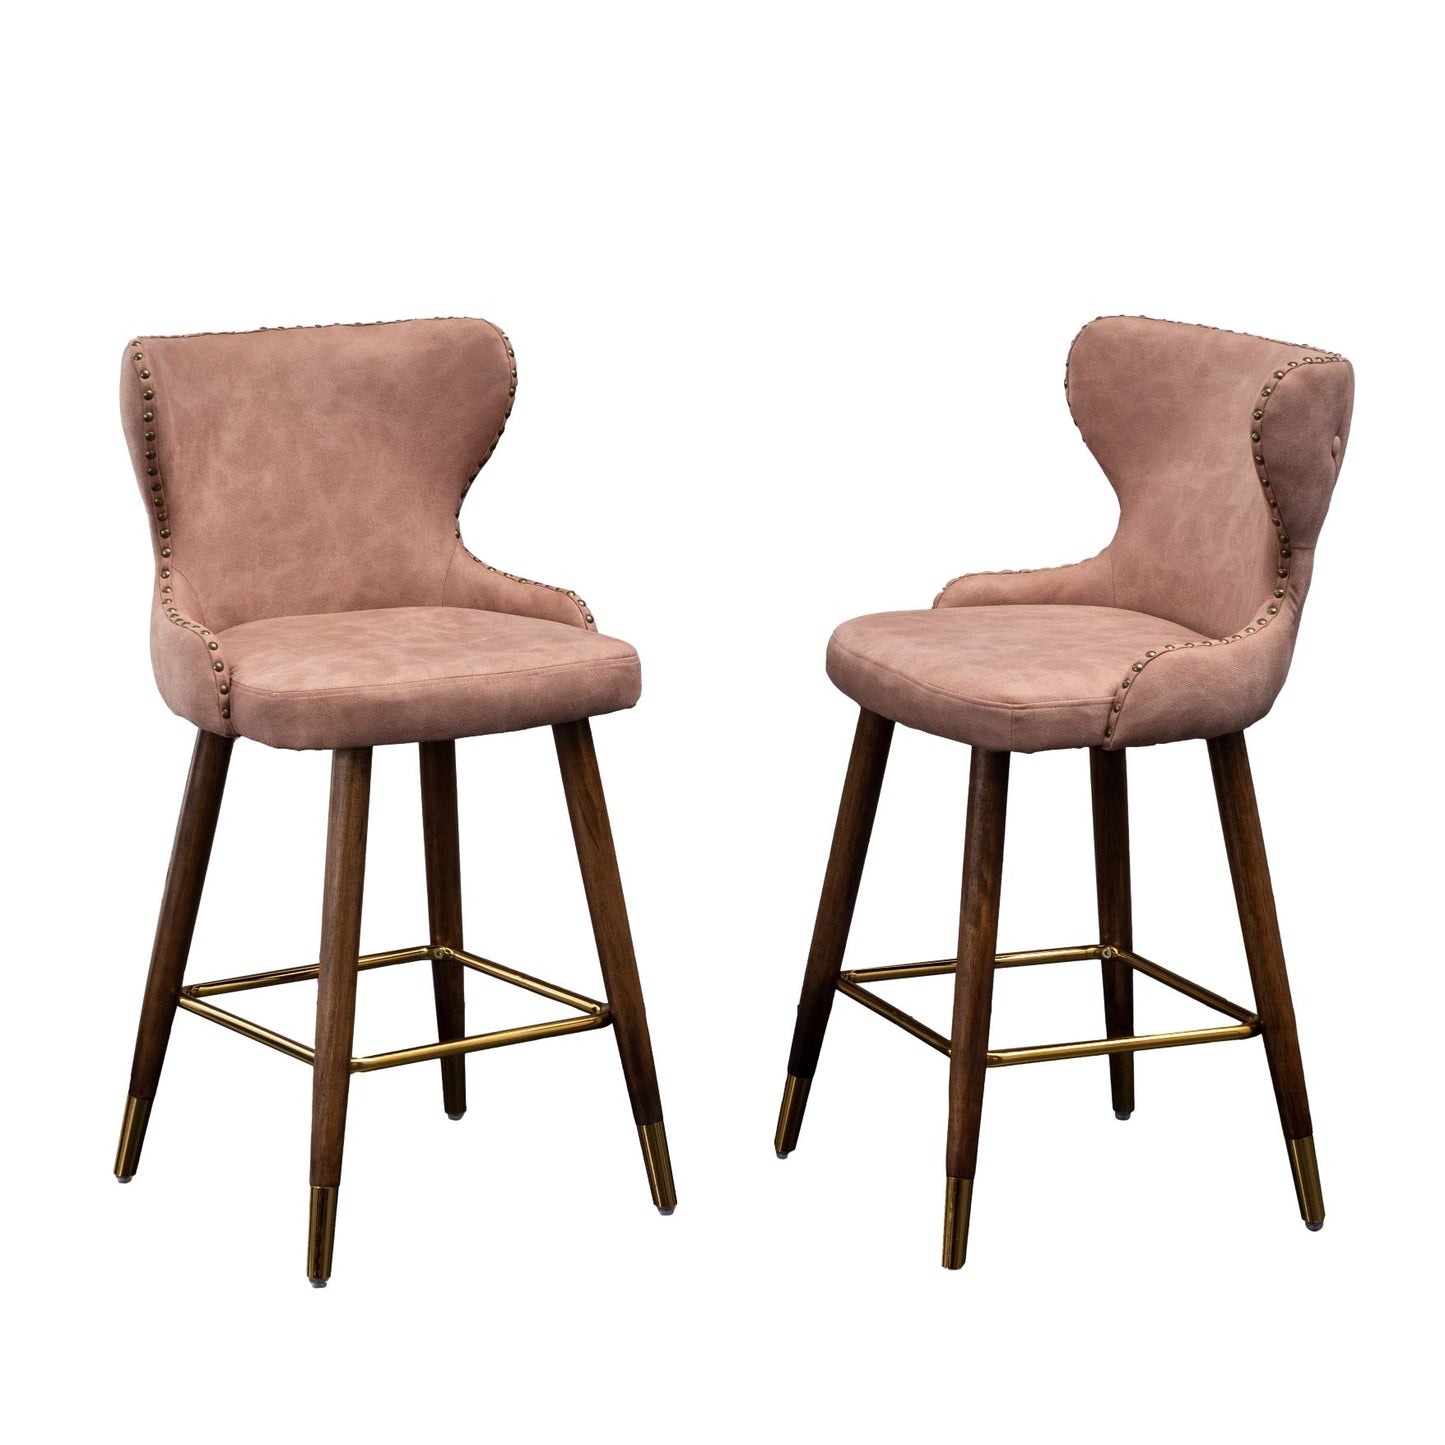 Nevis Mid-century Modern Faux Leather Tufted Nailhead Trim Counter Stools, Set of 2